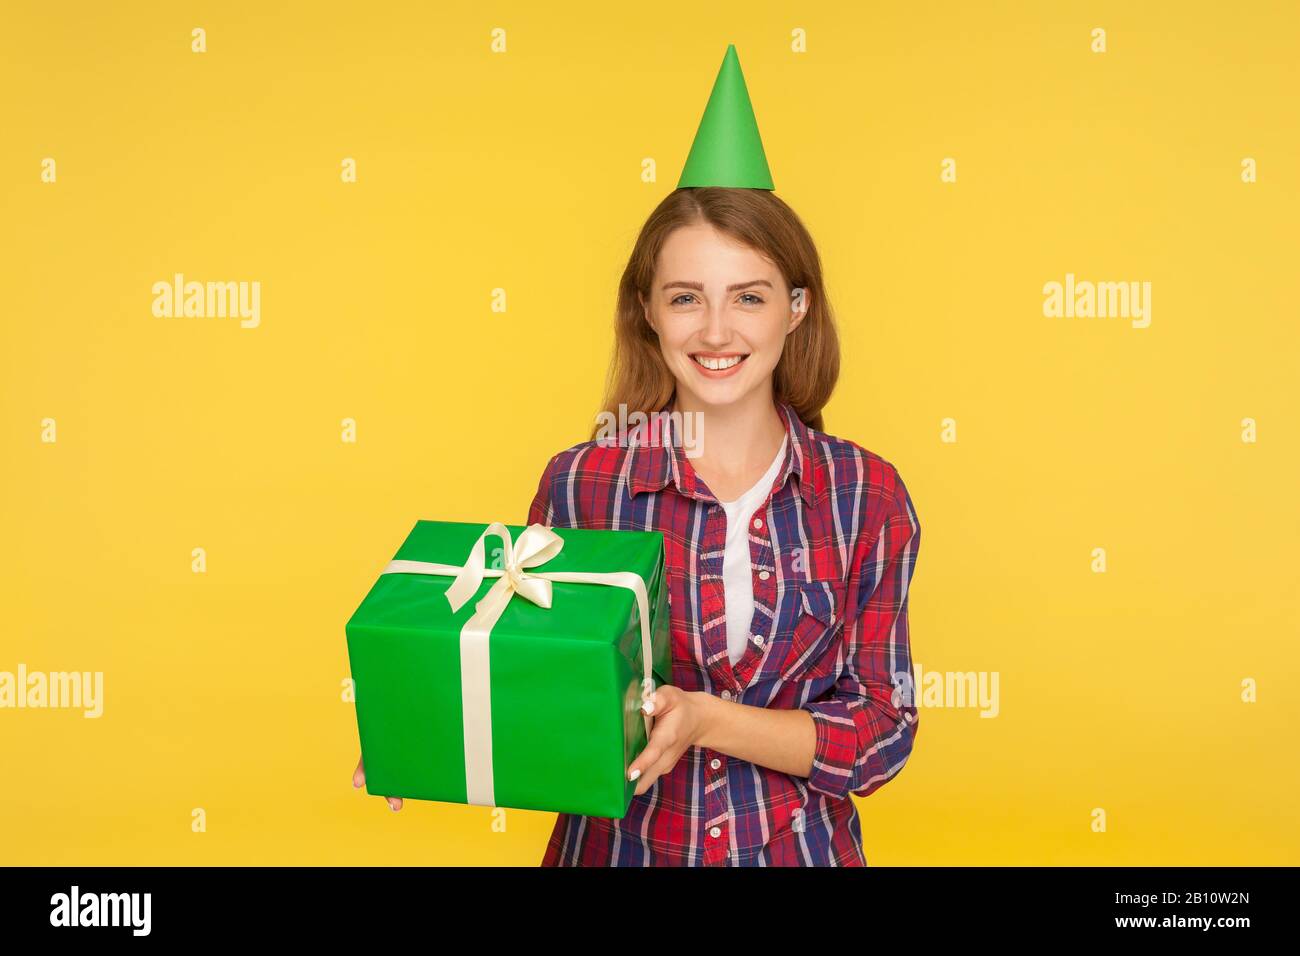 Portrait of cheerful funny ginger girl with party cone on head holding gift box and smiling happily, excited about present on birthday, holiday bonus. Stock Photo